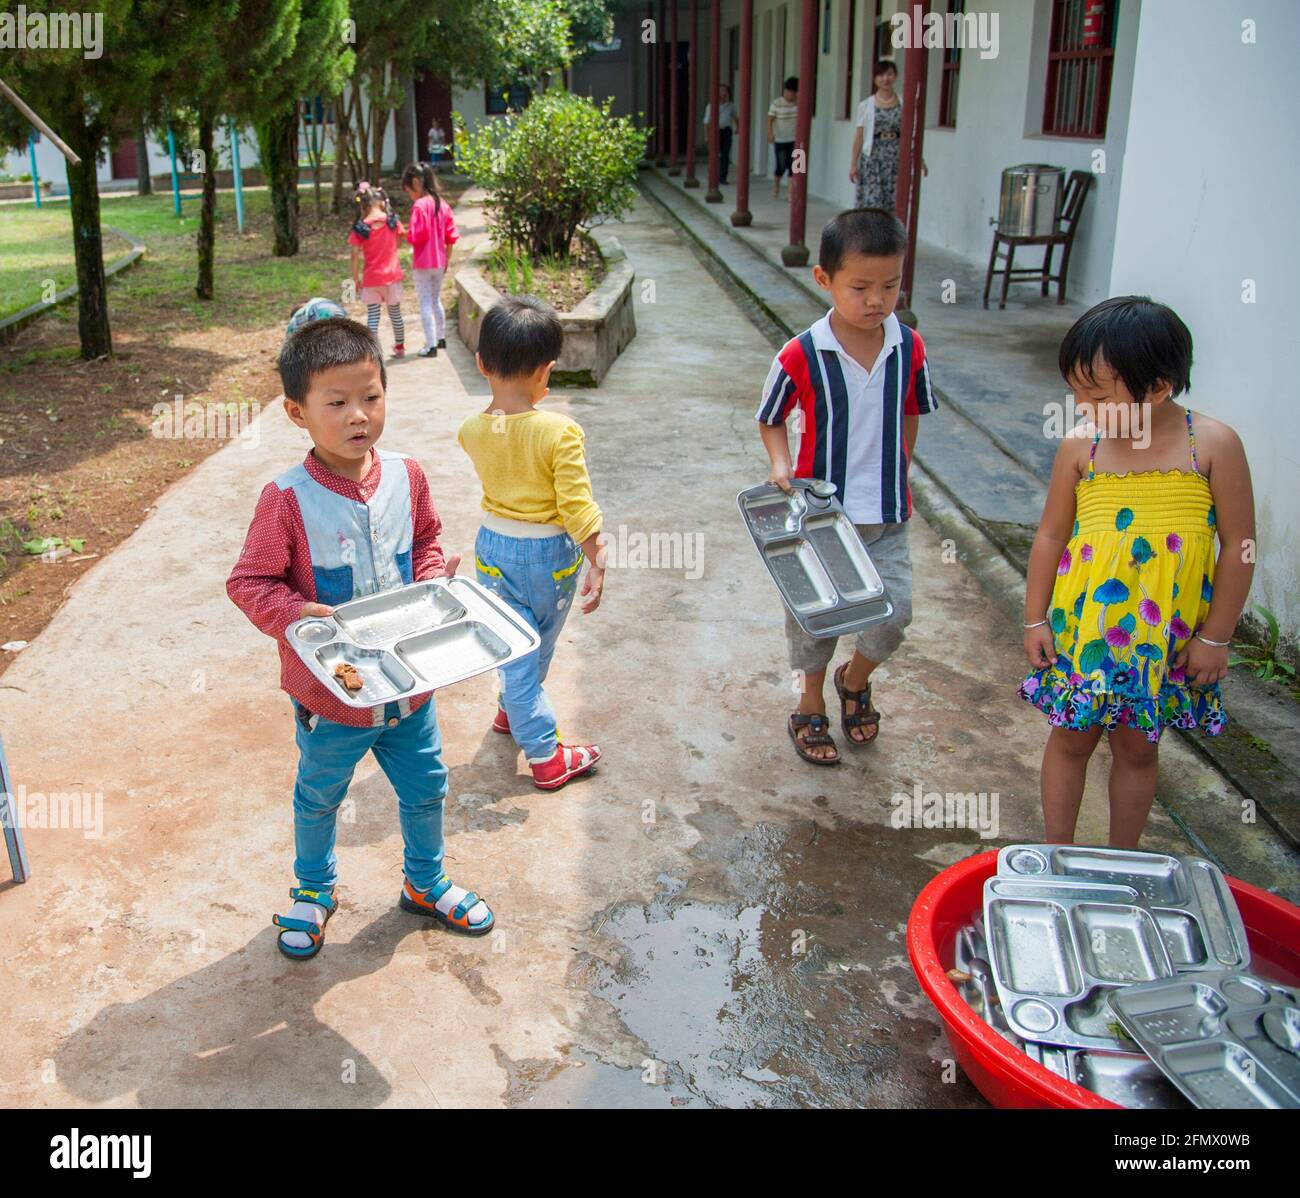 Student lining up for lunch and returning lunch plates in a rural school in Xiuning, Anhui, China Stock Photo